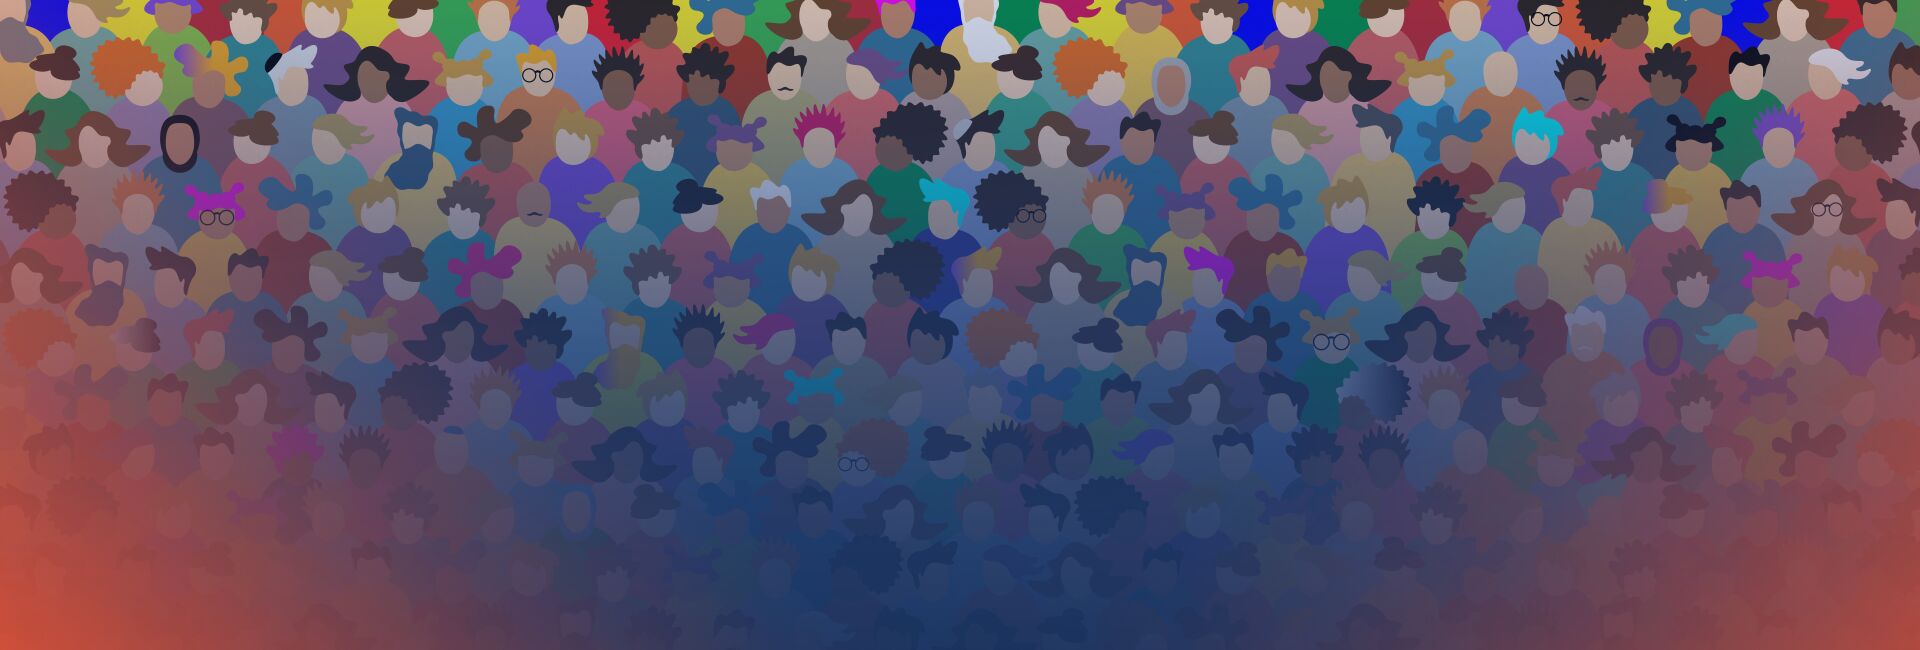 Many graphic representations of diverse people